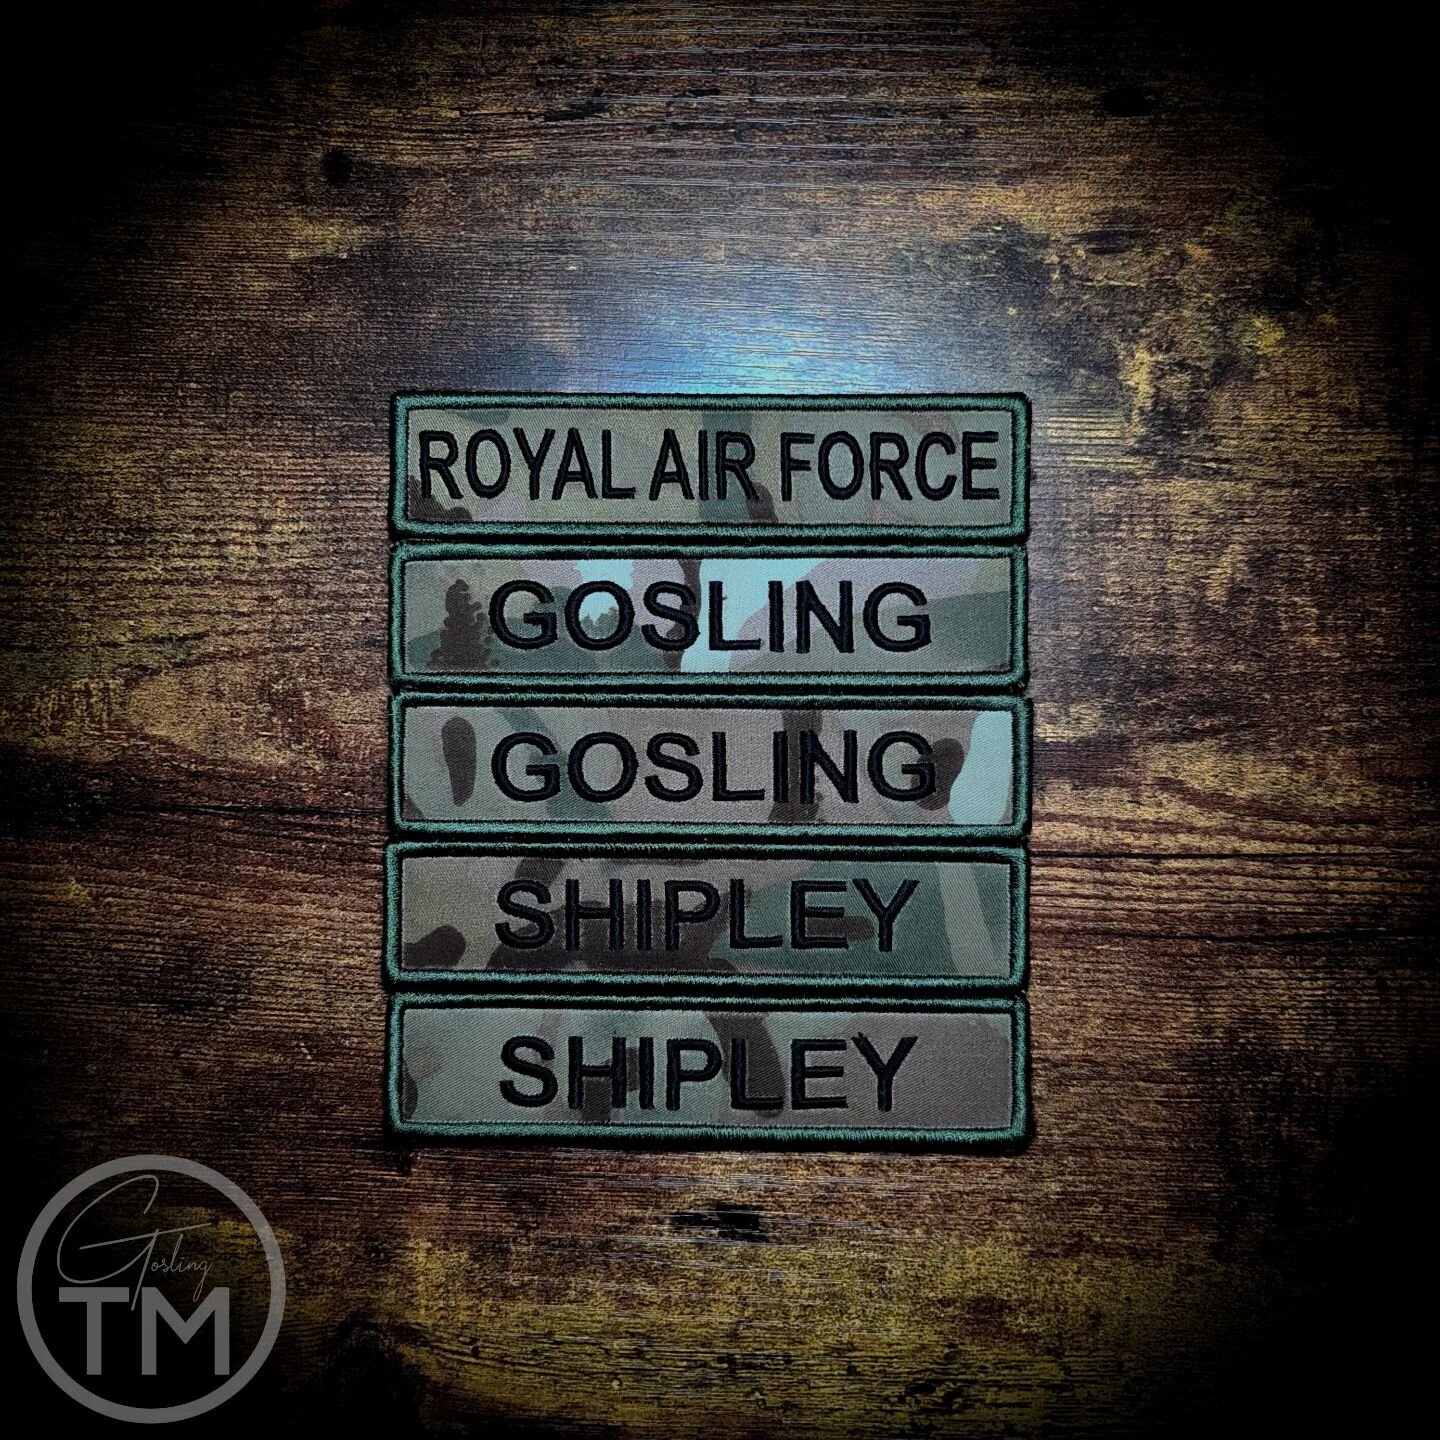 NAMES PLEASE!

Here is a nice selection of some name badges that we have recently made, (there is also an RAF Service Identifyer badge hiding in there too)!

These badges all come in a standard size, designed to be worn on MTP Barrack Shirts, PCS Jac